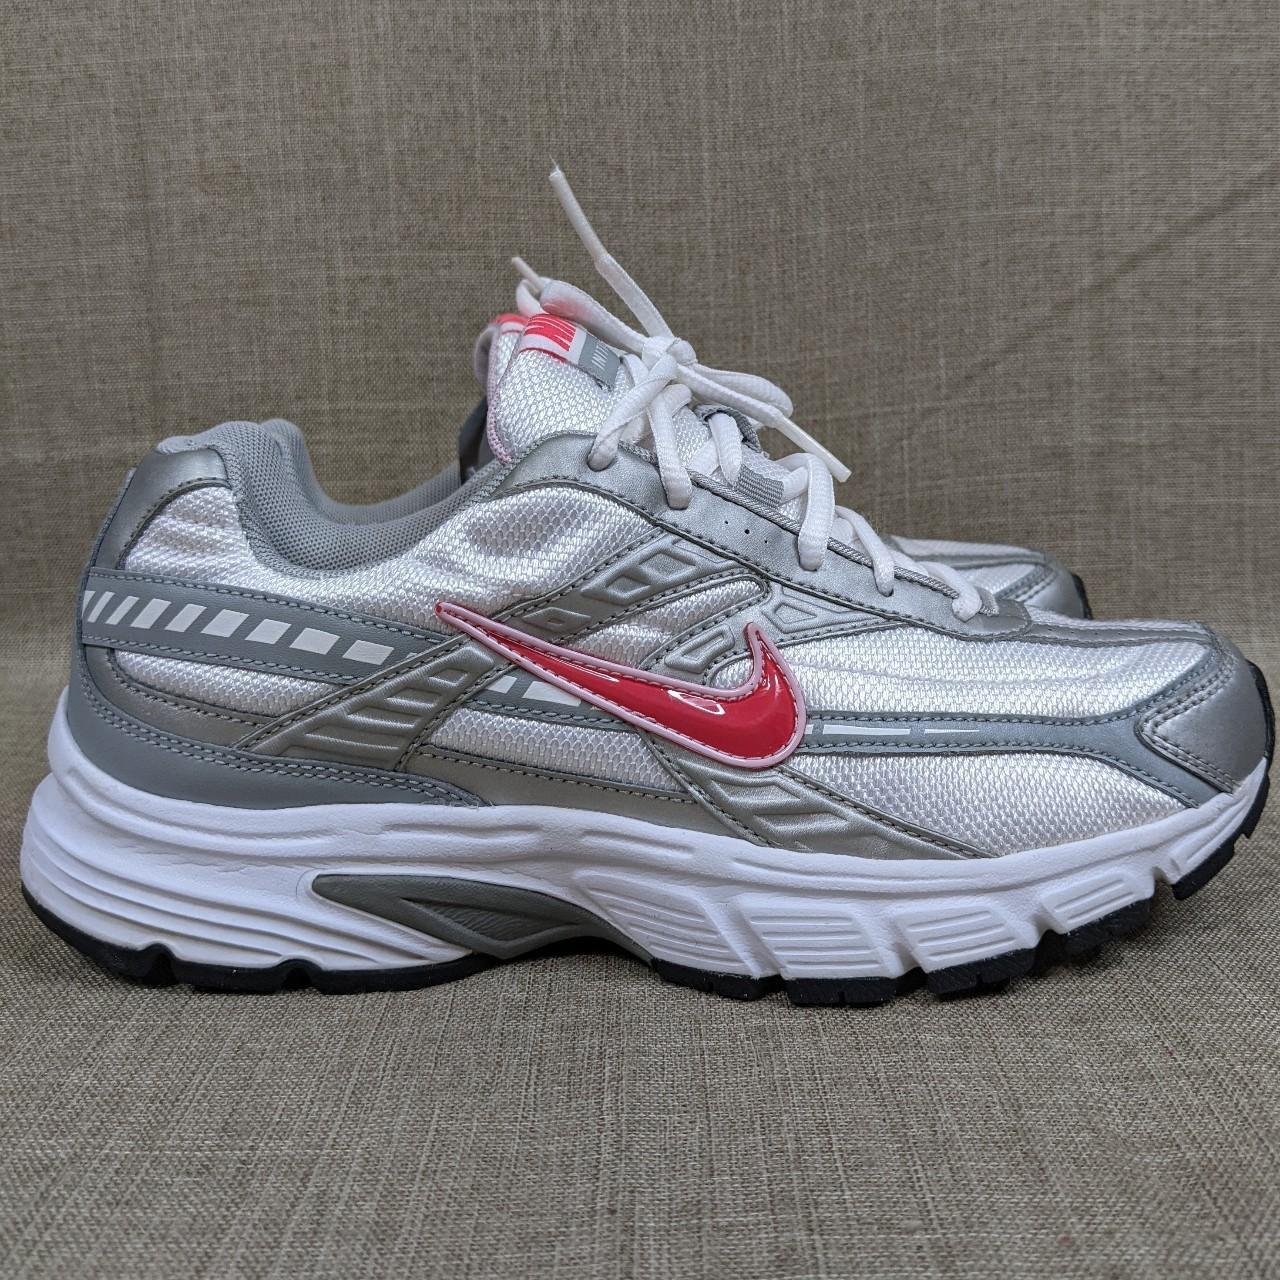 Product Image 3 - Nike women's chunky dad sneakers.

Women's